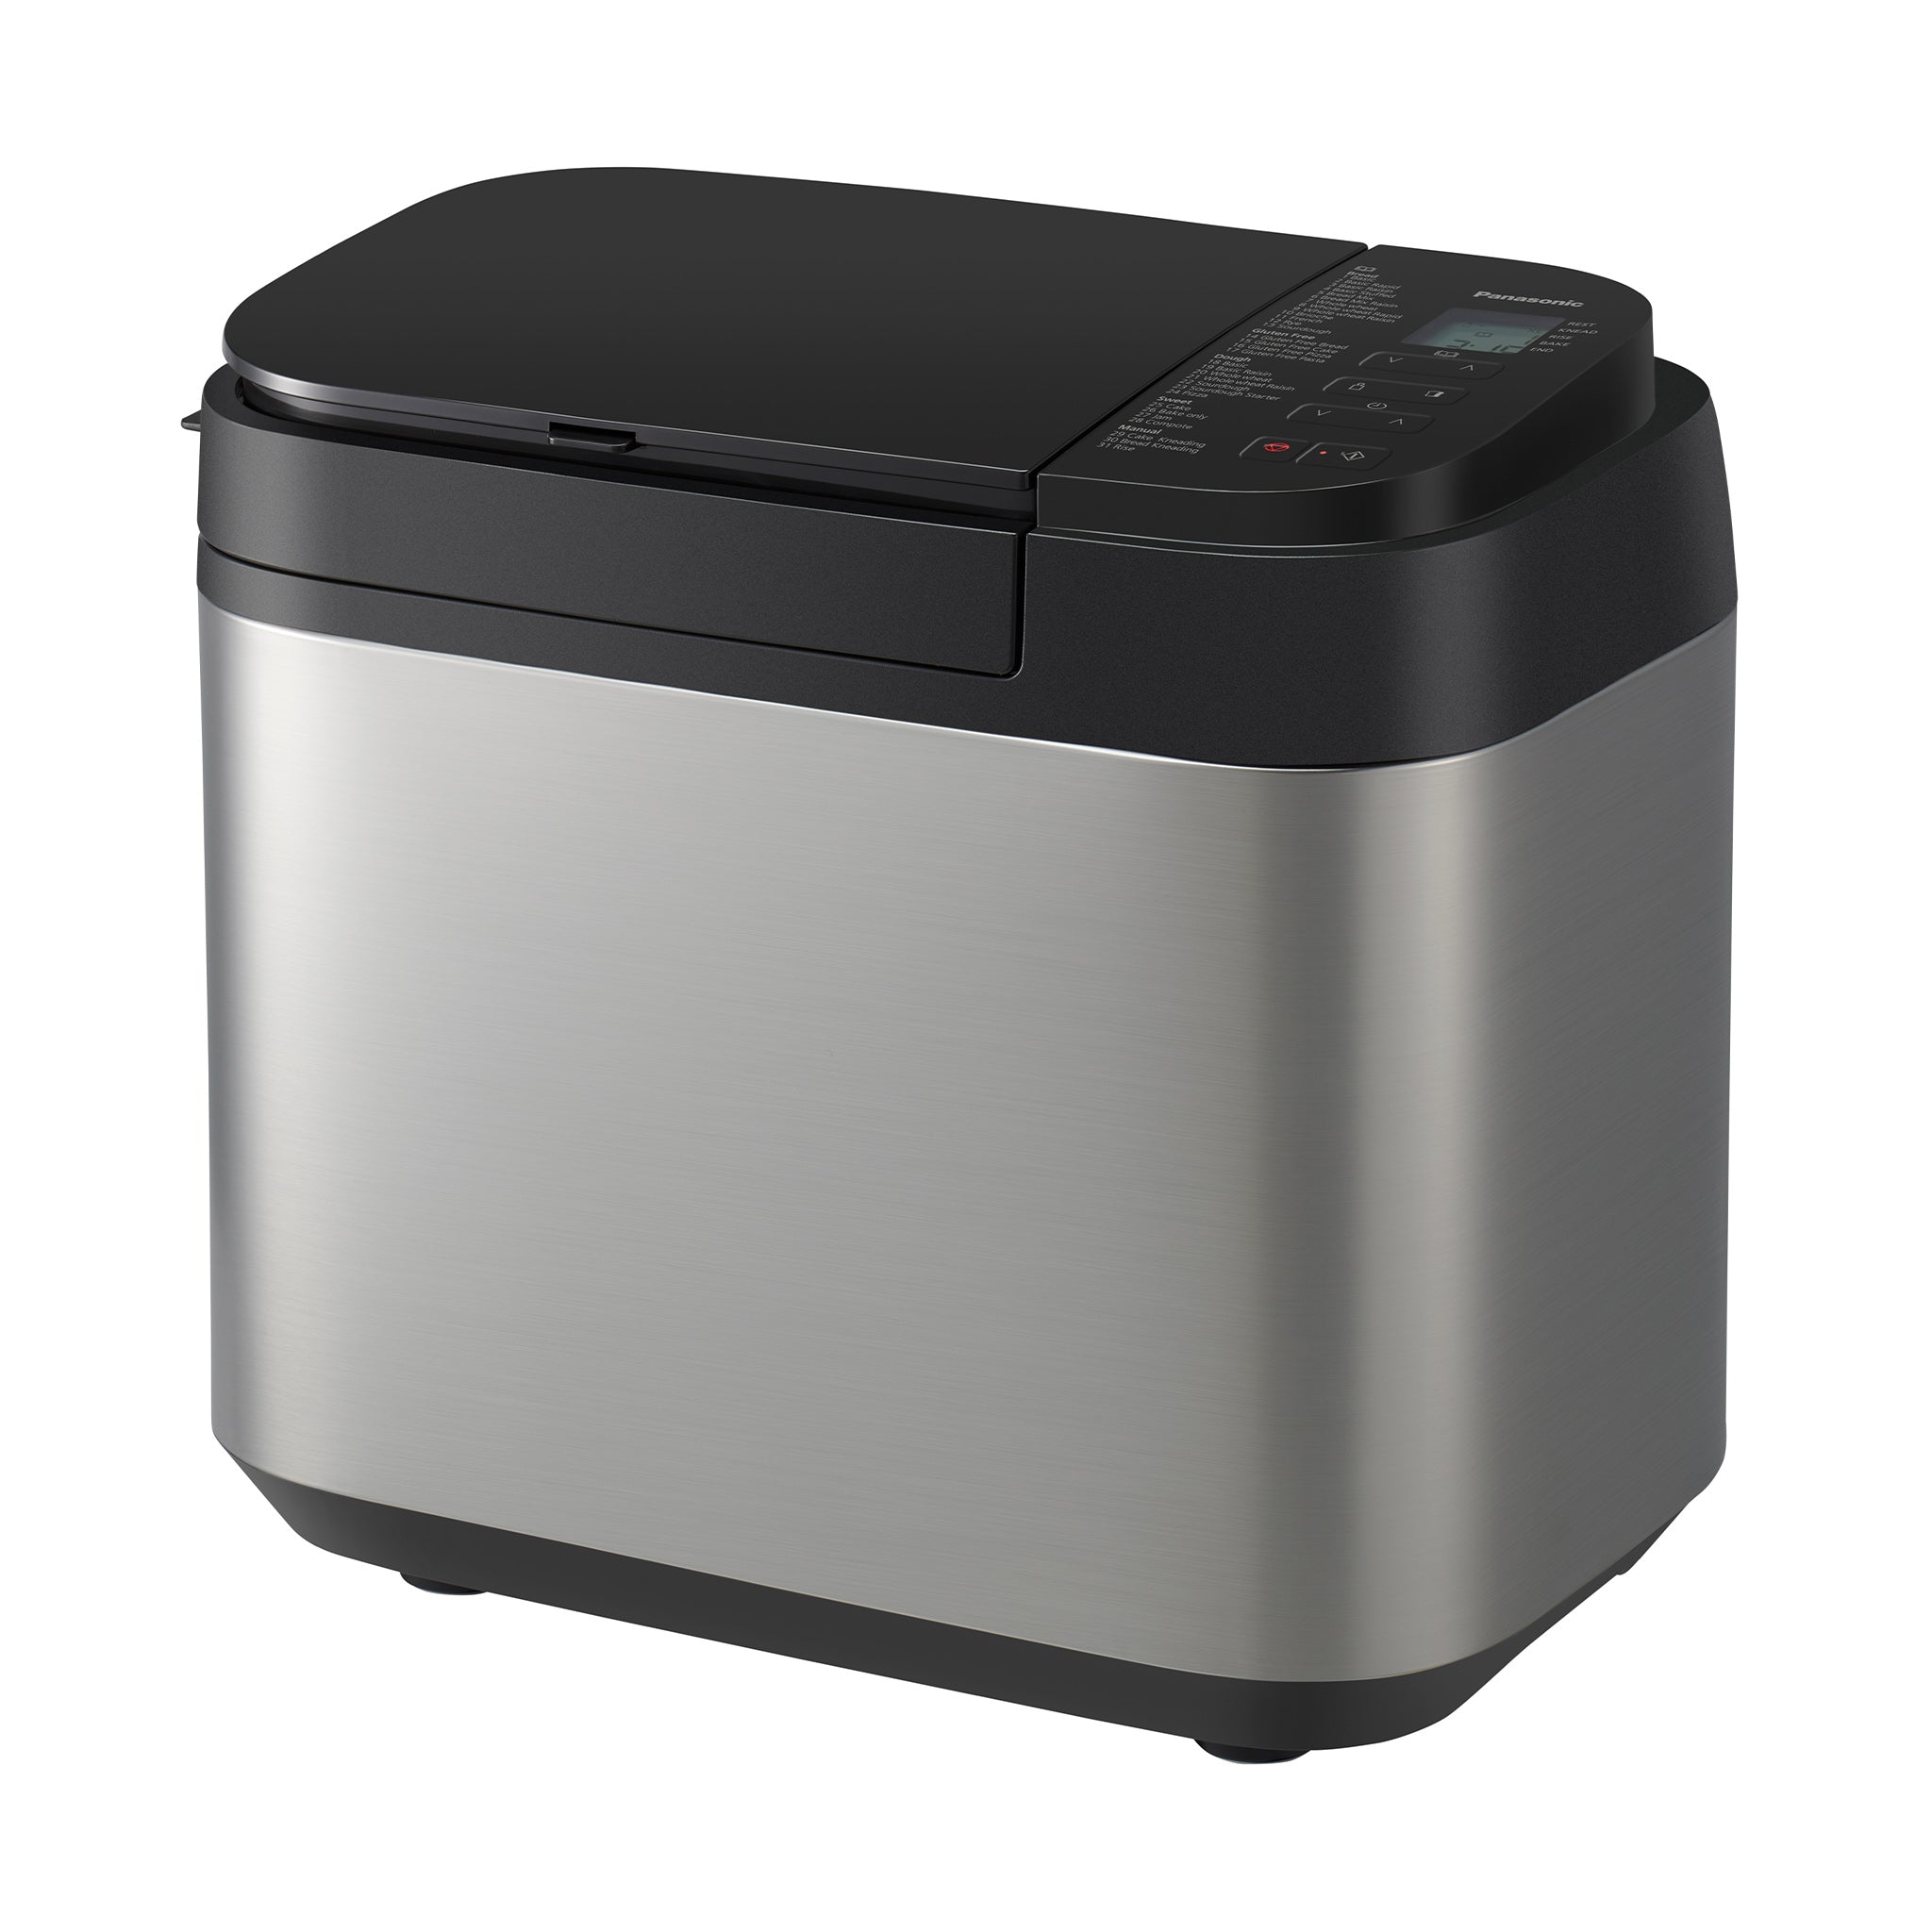 Automatic Bread Maker with 20 Presets